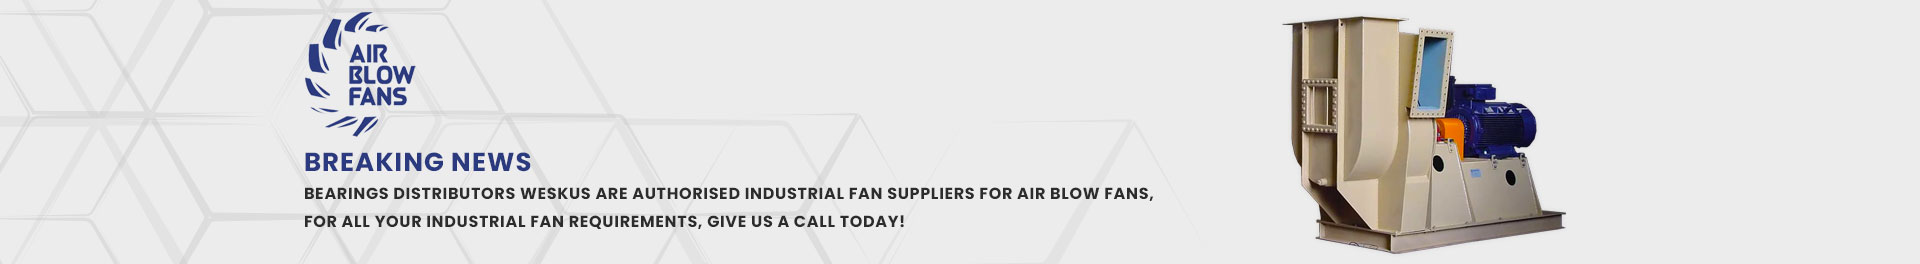 BD Weksus is a distributor of Air Blow Fans